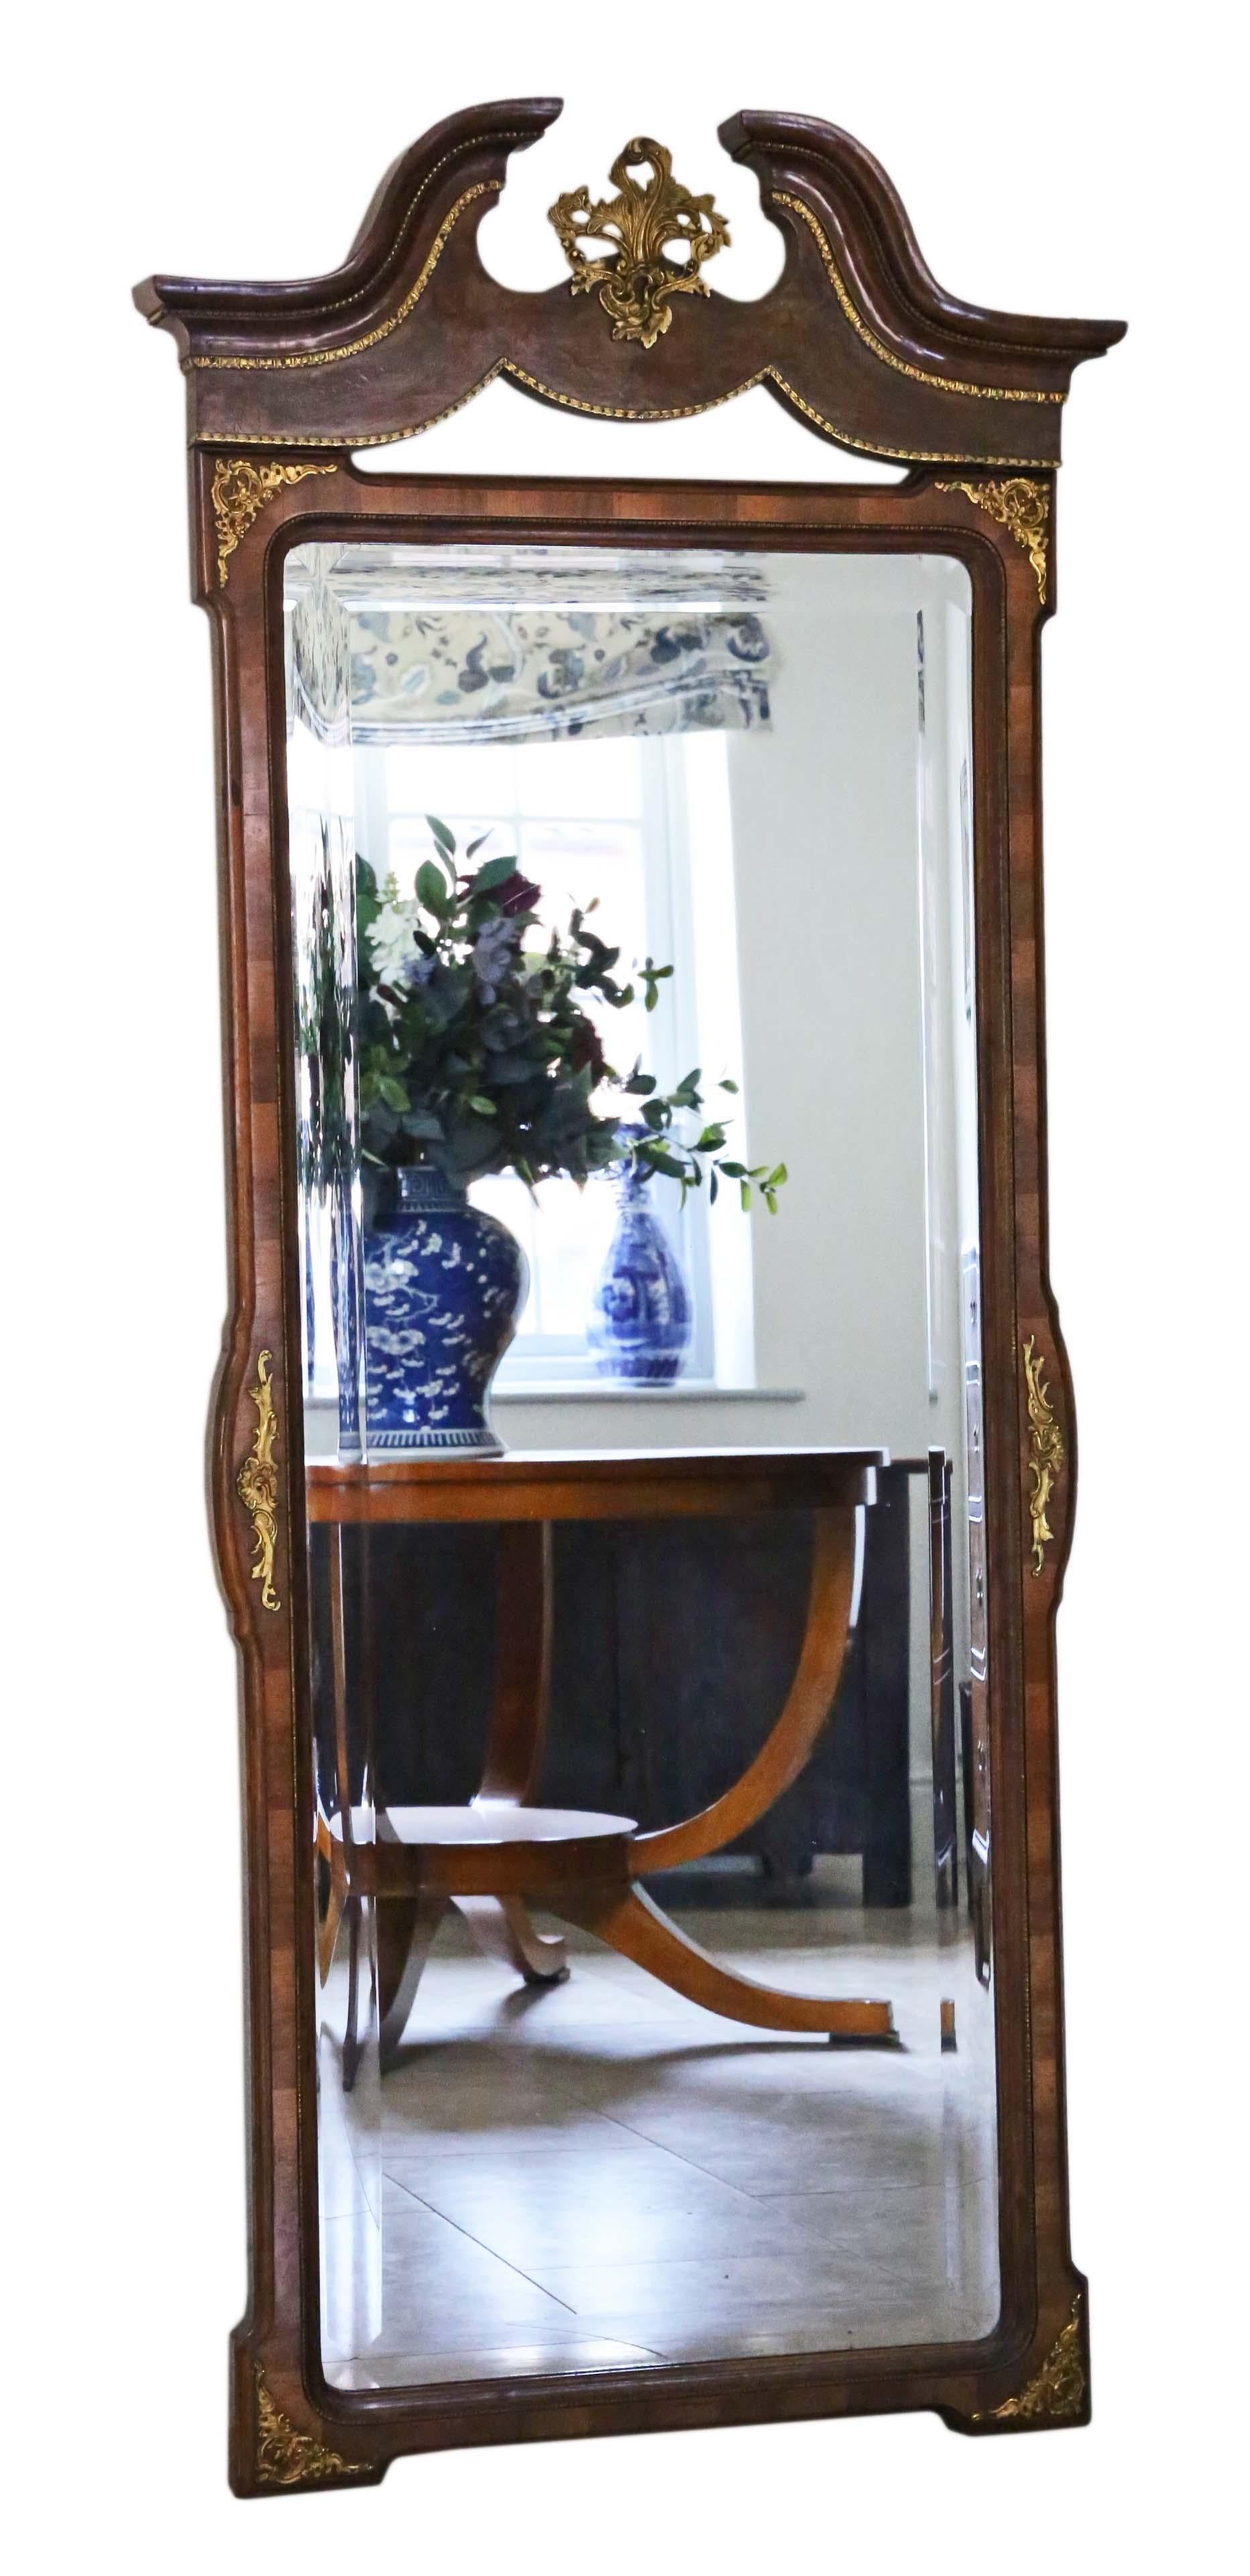 Antique, large, and finely crafted burr walnut and gilt full-height wall mirror from around 1910, emanating a delightful charm and elegance.

This mirror is a rare and captivating find, boasting a well-maintained frame with gilt brass decoration and